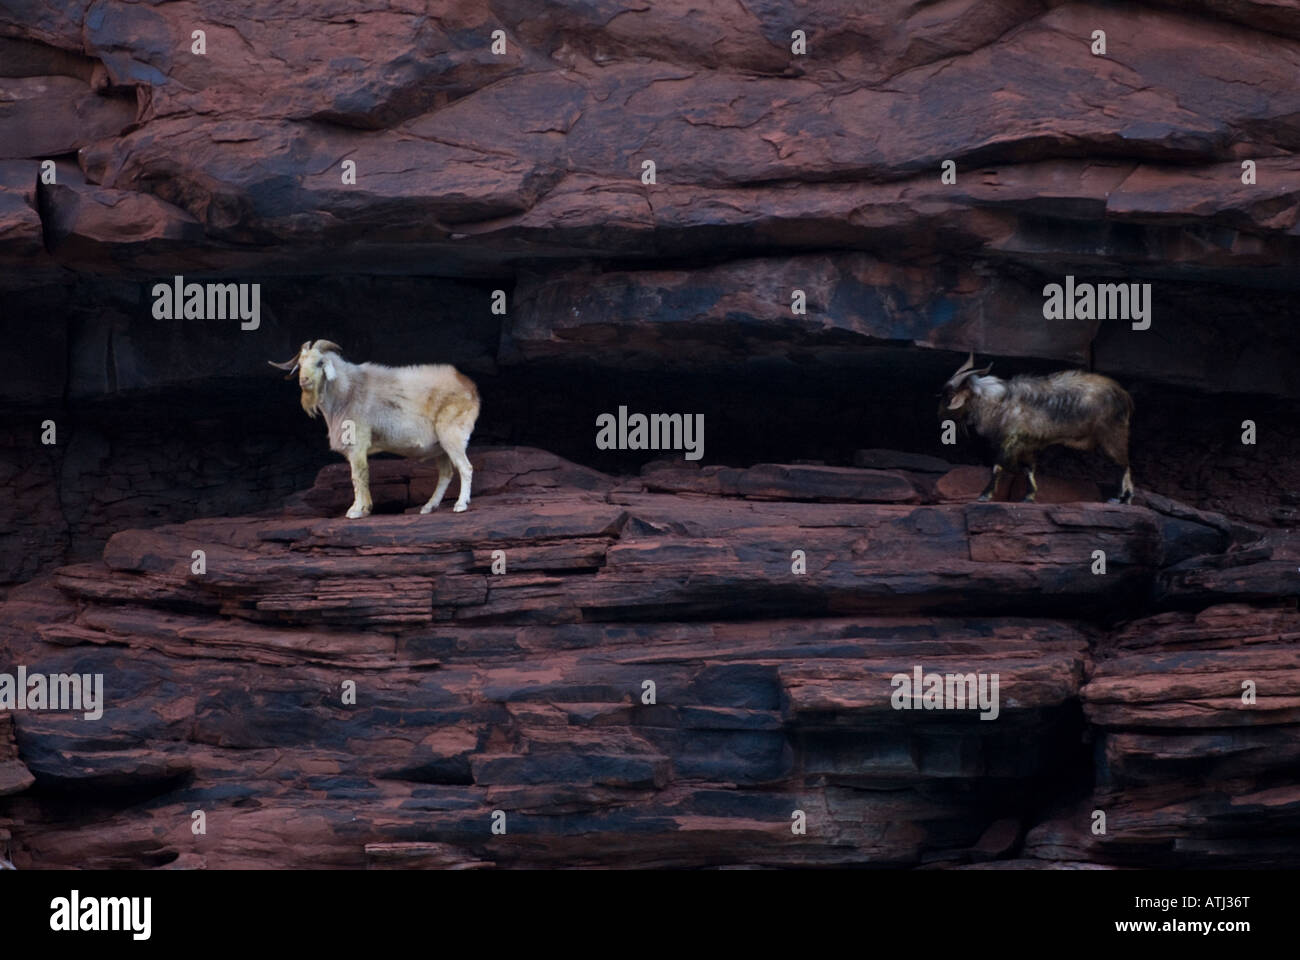 Goats along the cliff walls of the Grand Canyon near the Colorado River bank in National Park Arizona Stock Photo